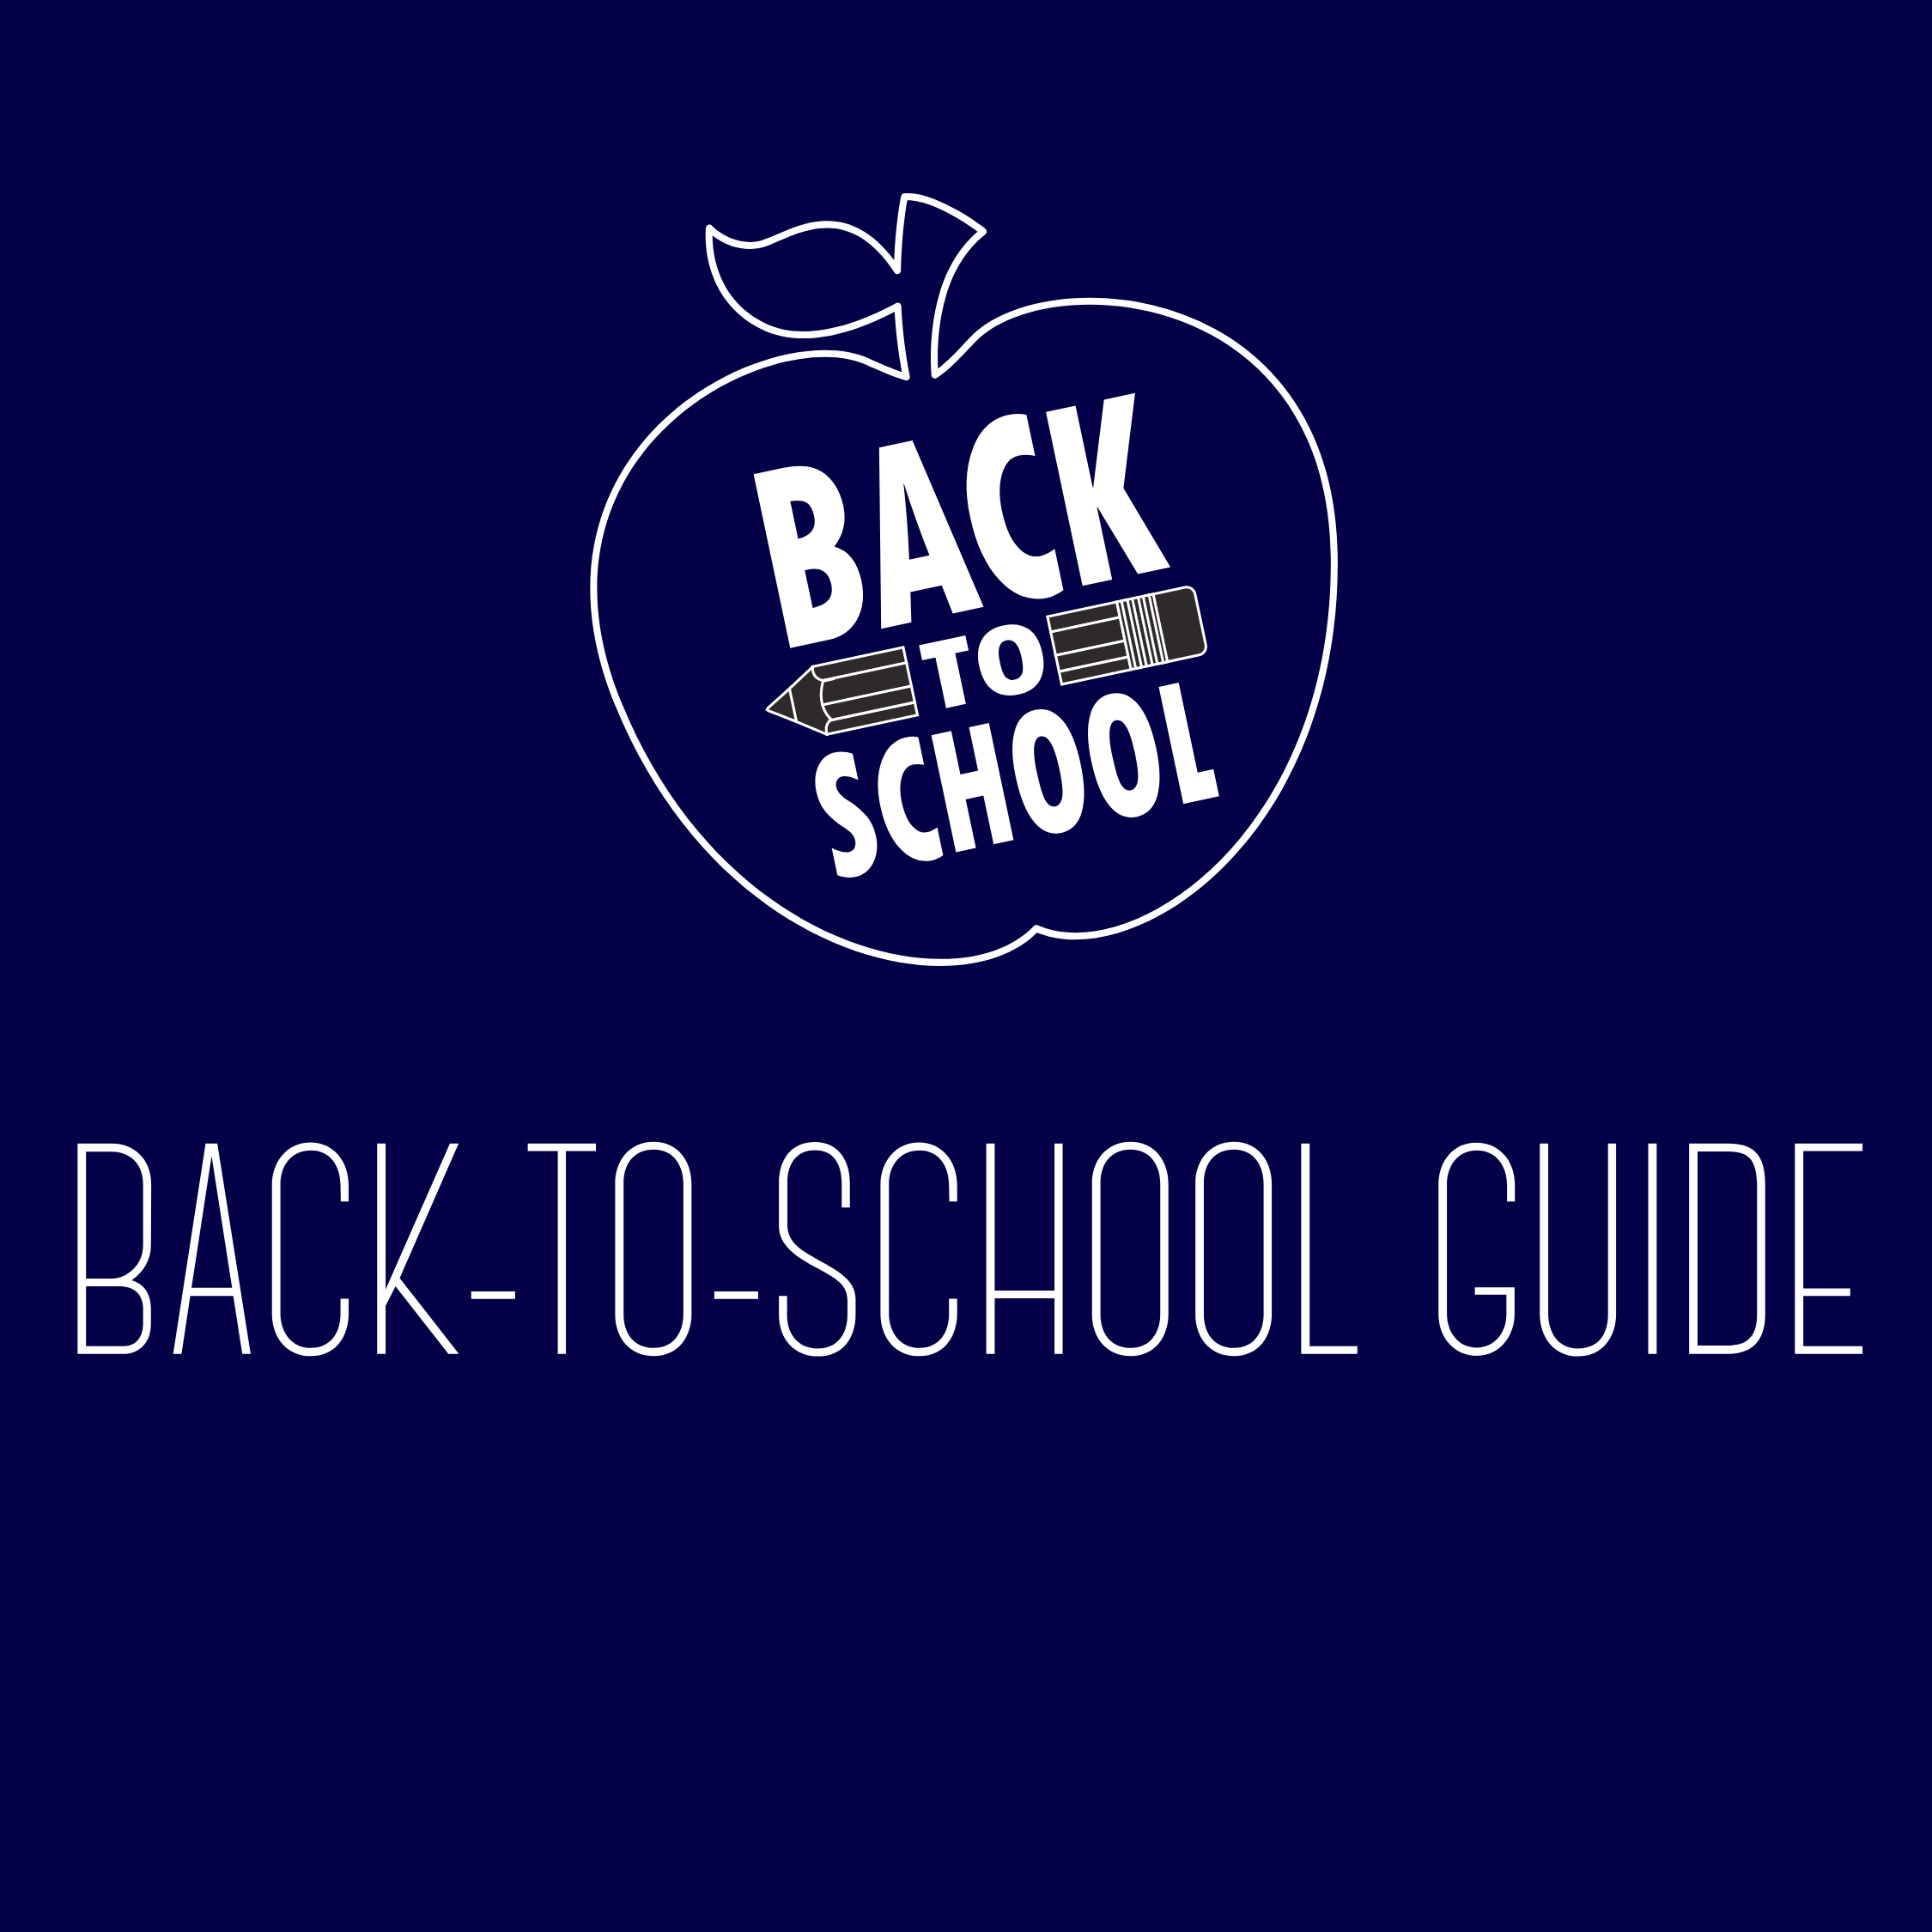 Back-to-School Guide